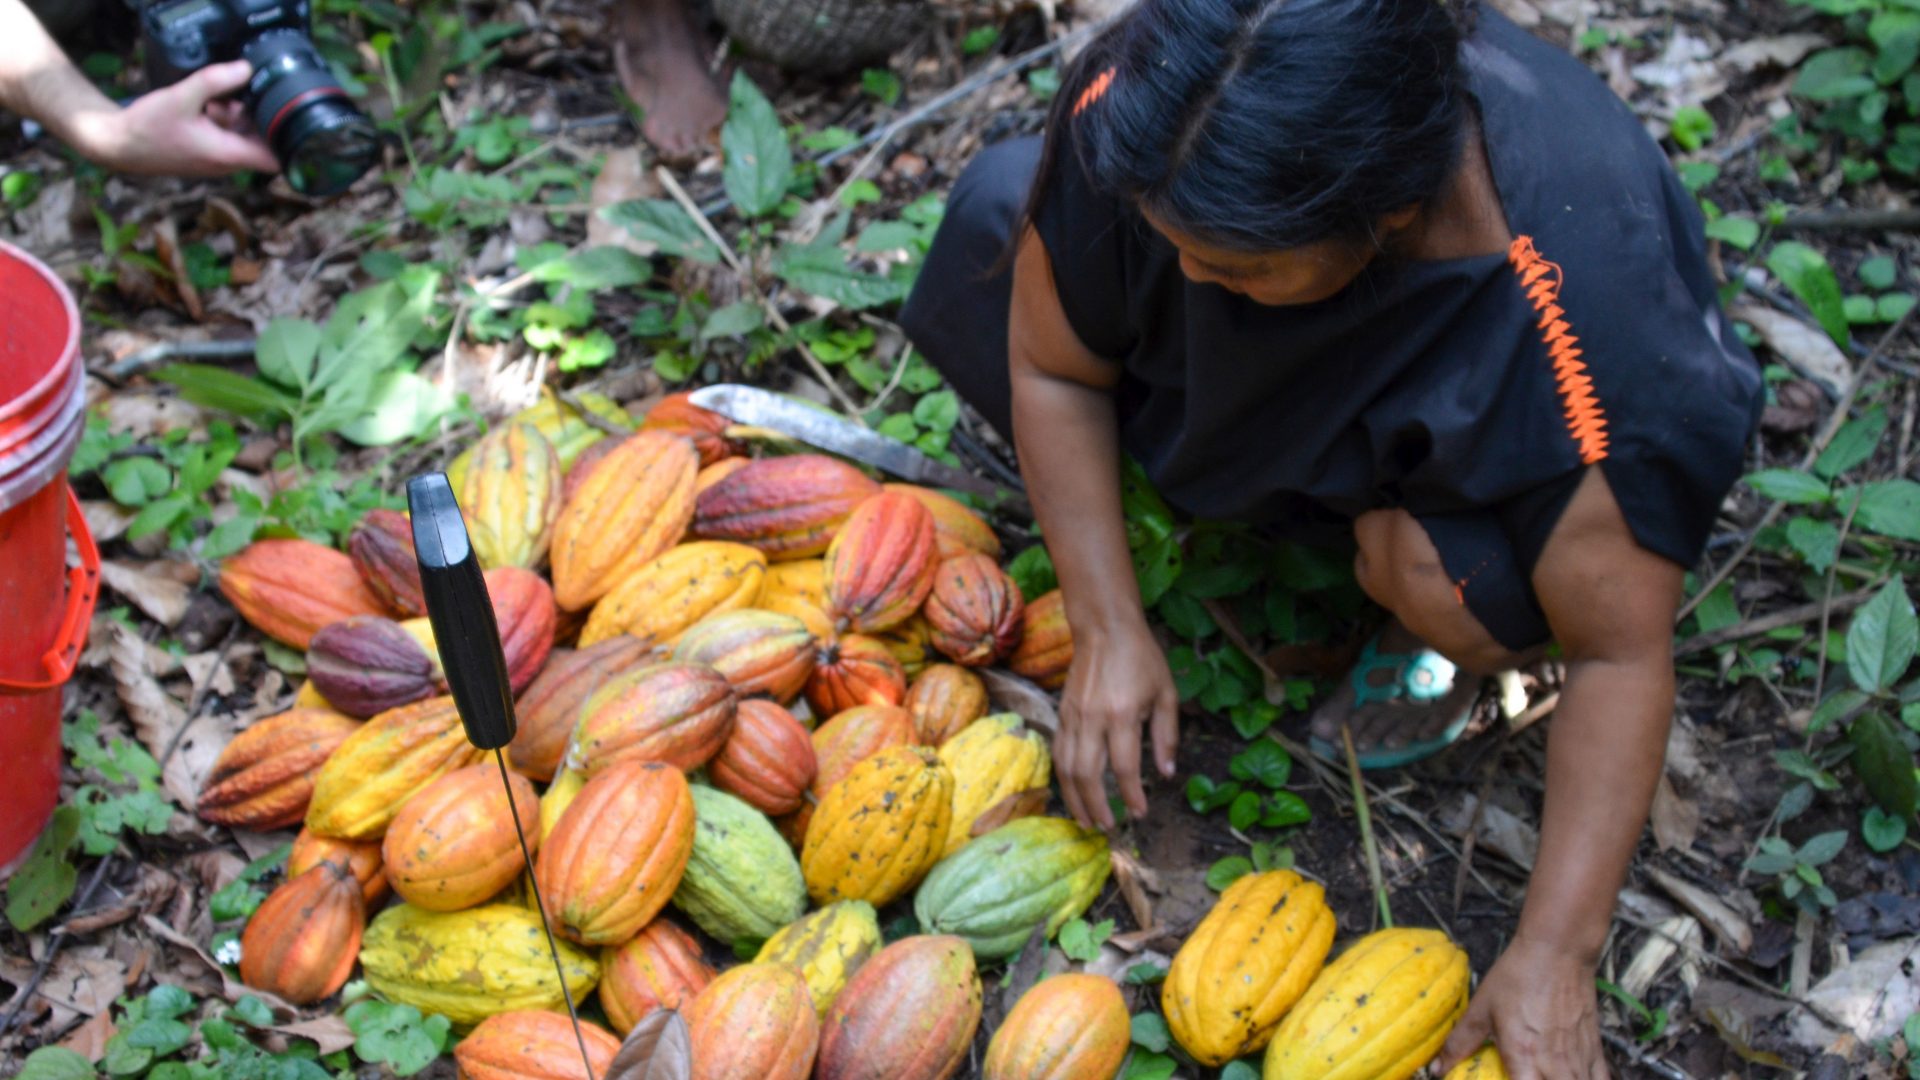 Mariá harvests cacao pods, the raw ingredients for chocolate.